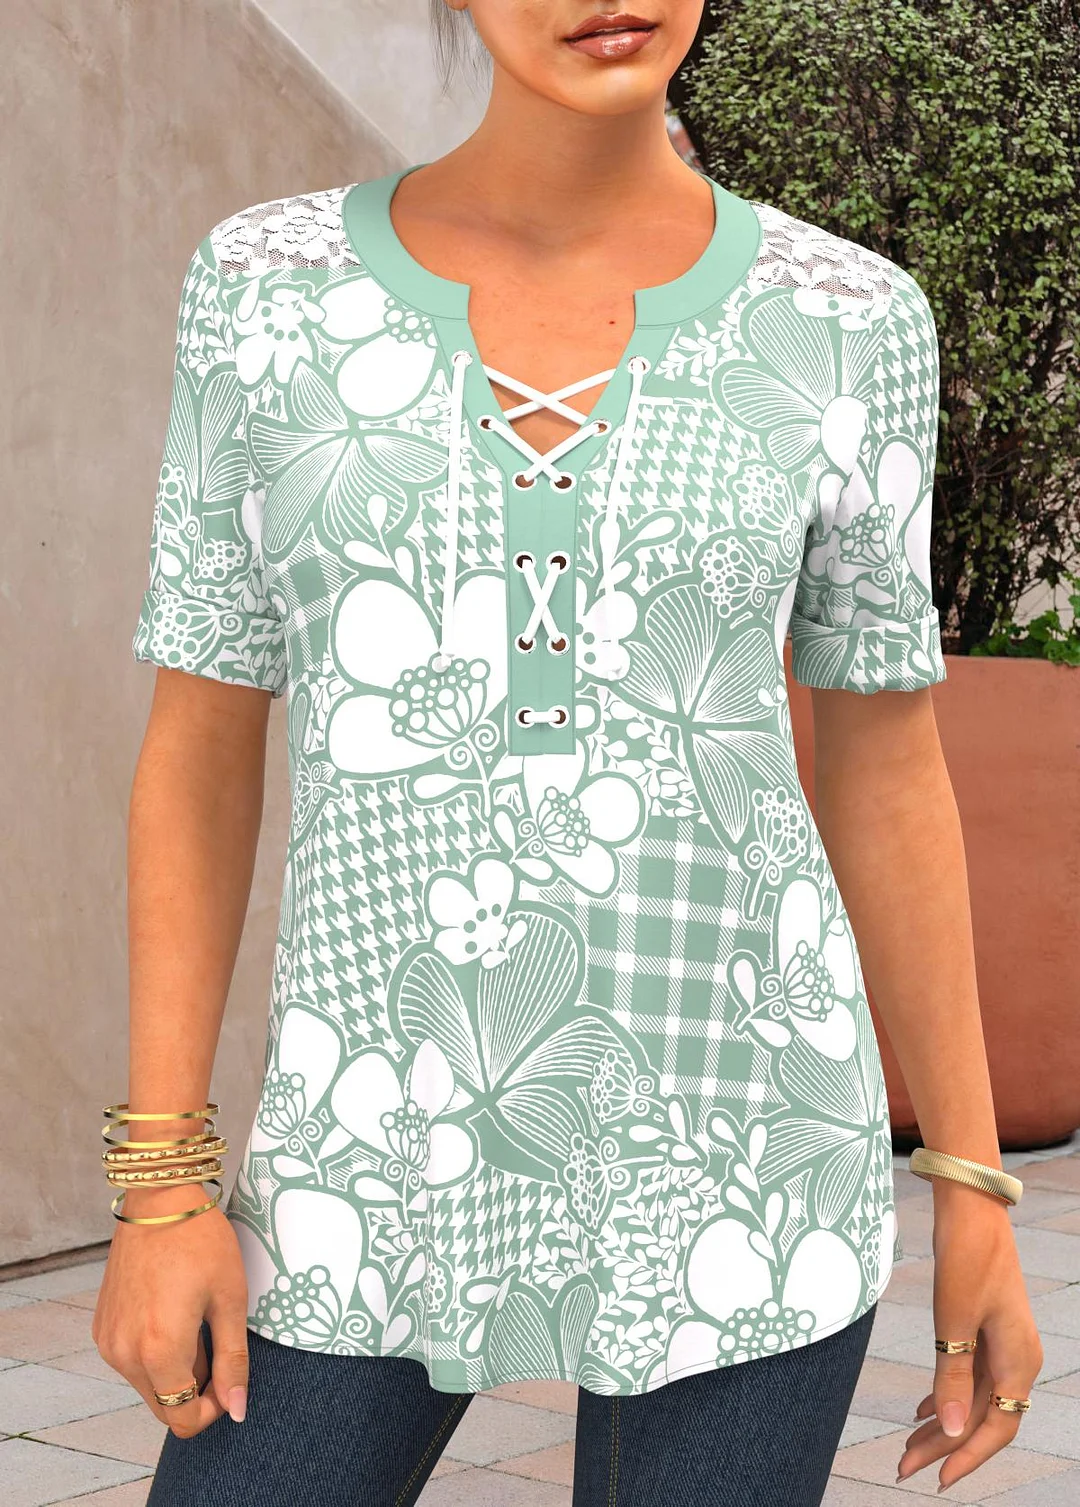 Lace Up Houndstooth Print Light Green Blouse